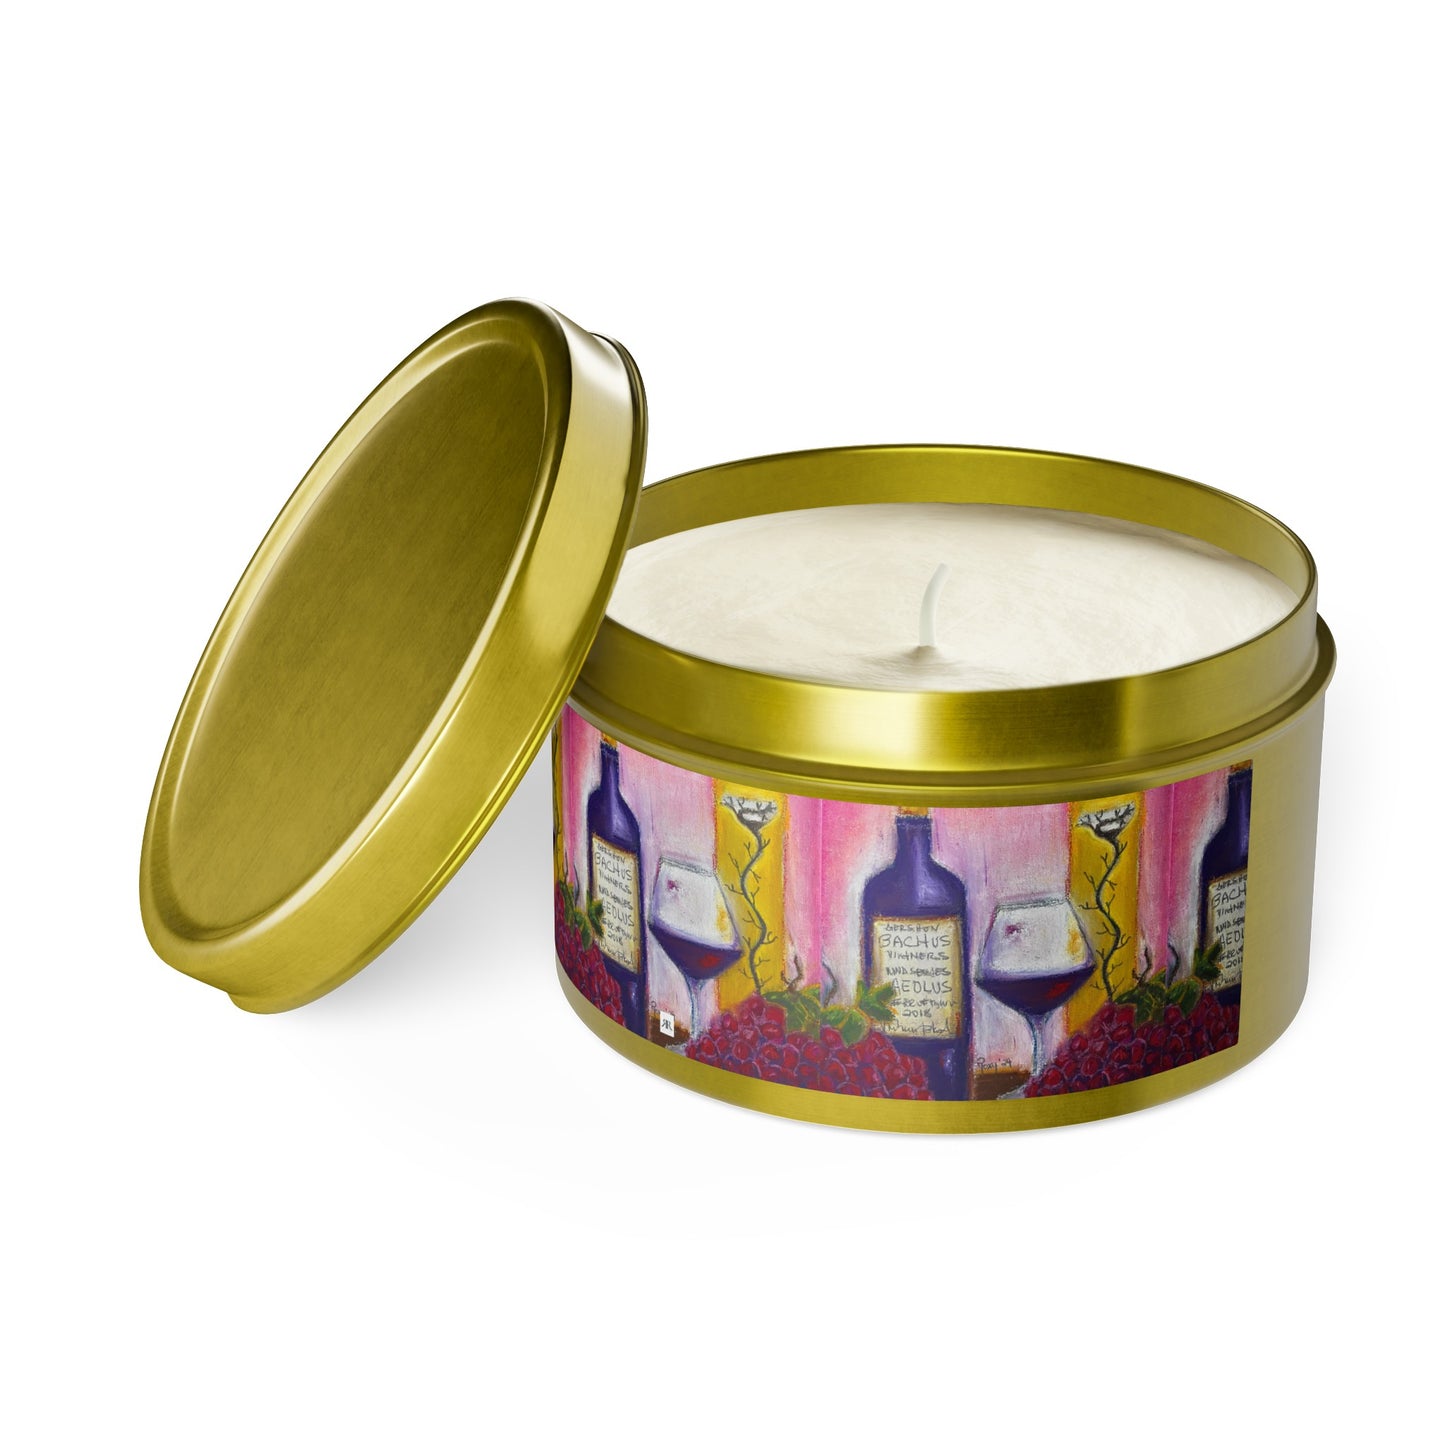 Aeolus GBV Wine & Clique Glass Tin Candle